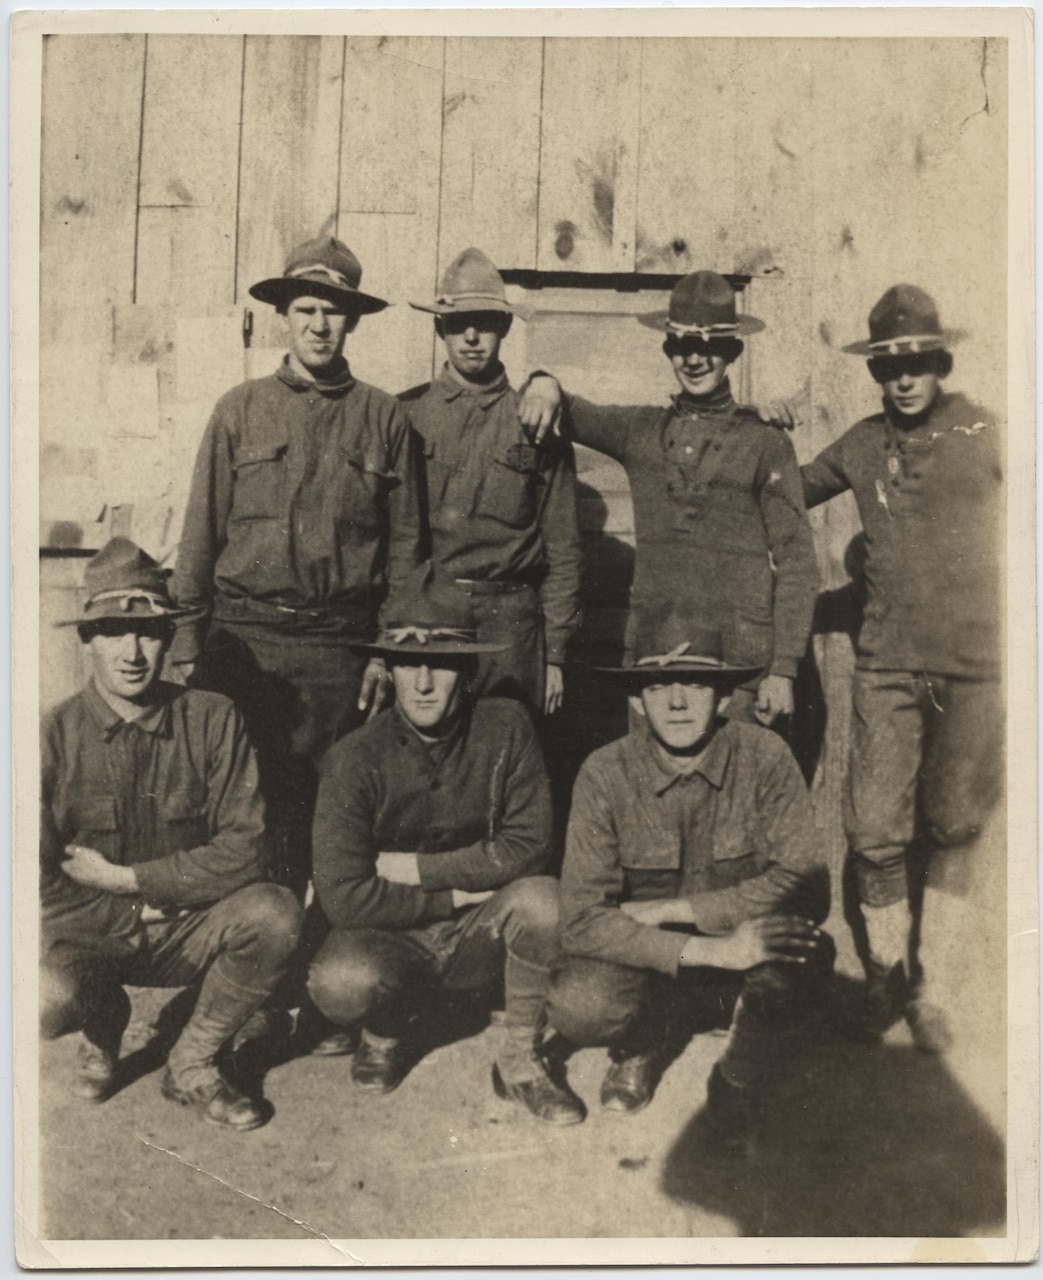 World War I Centennial Commission Seeks 'Tradition of Service' Photos >  U.S. Department of Defense > Defense Department News